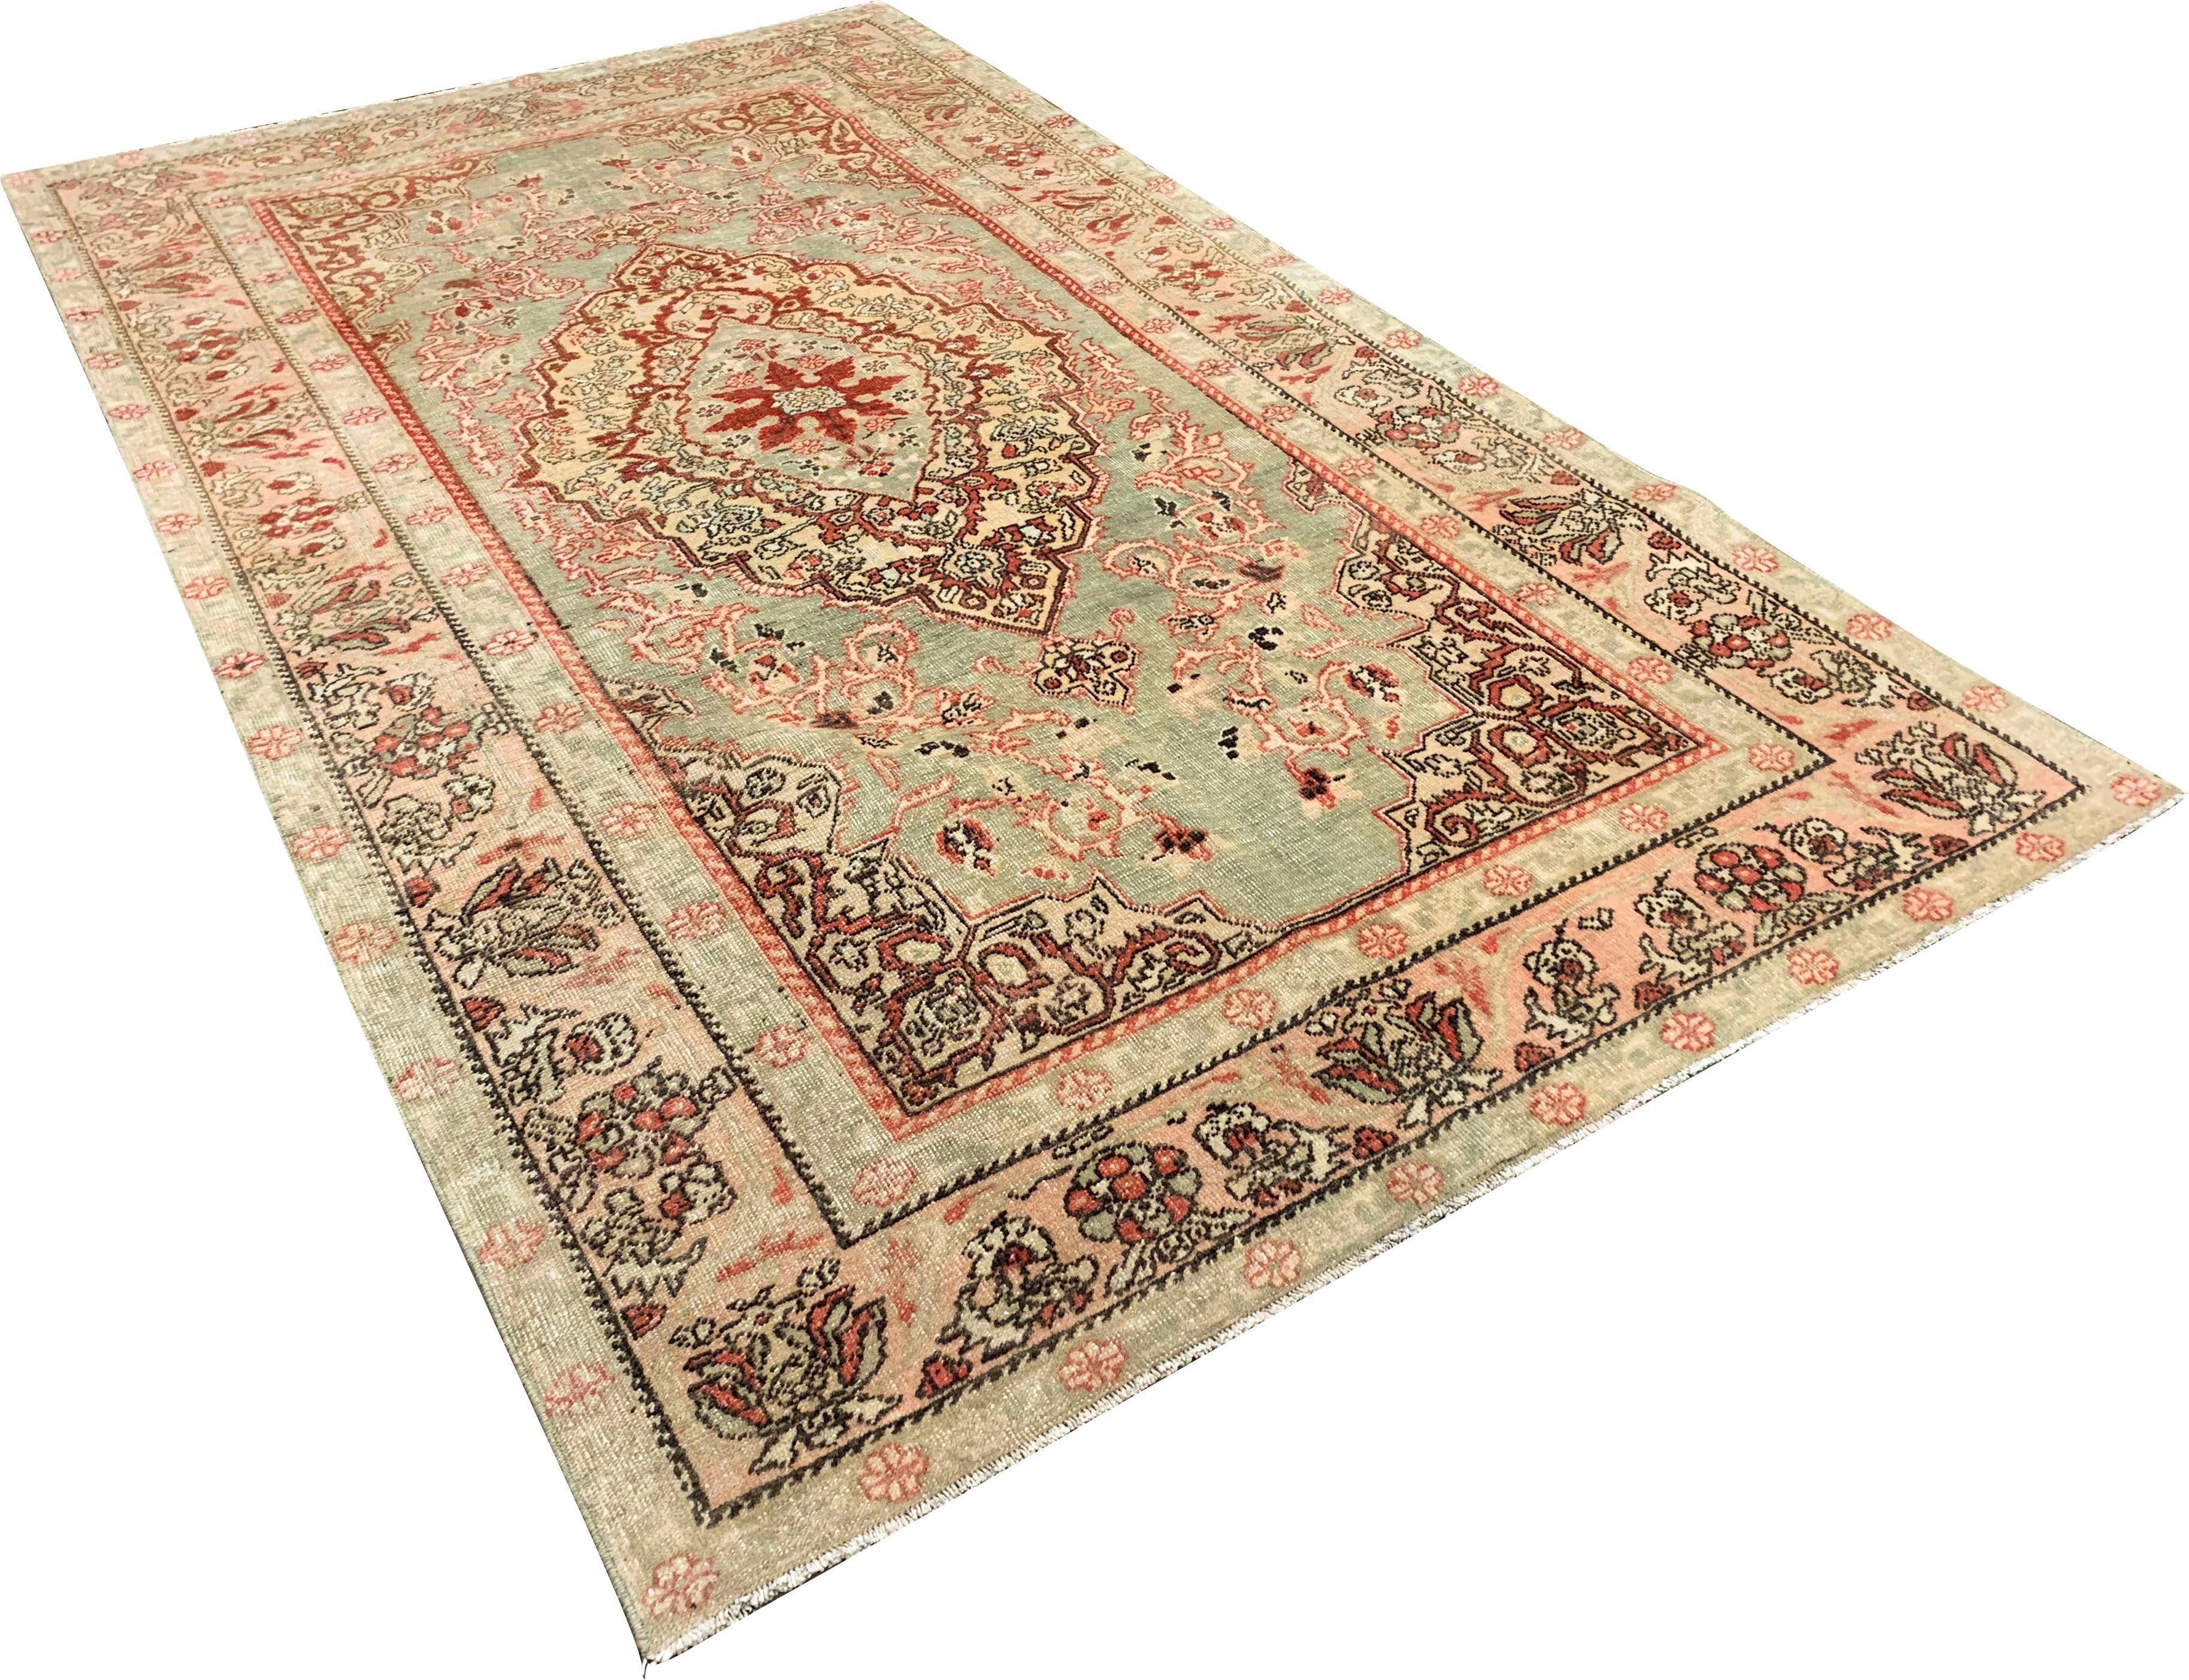 Vintage Oushak rug, circa 1940, 4'2 x 6'11. Handwoven in Turkey where rug weaving is the culture rather than a business. Rugs from Turkey are known for the high quality of their wool their beautiful patterns and warm colors. These designer